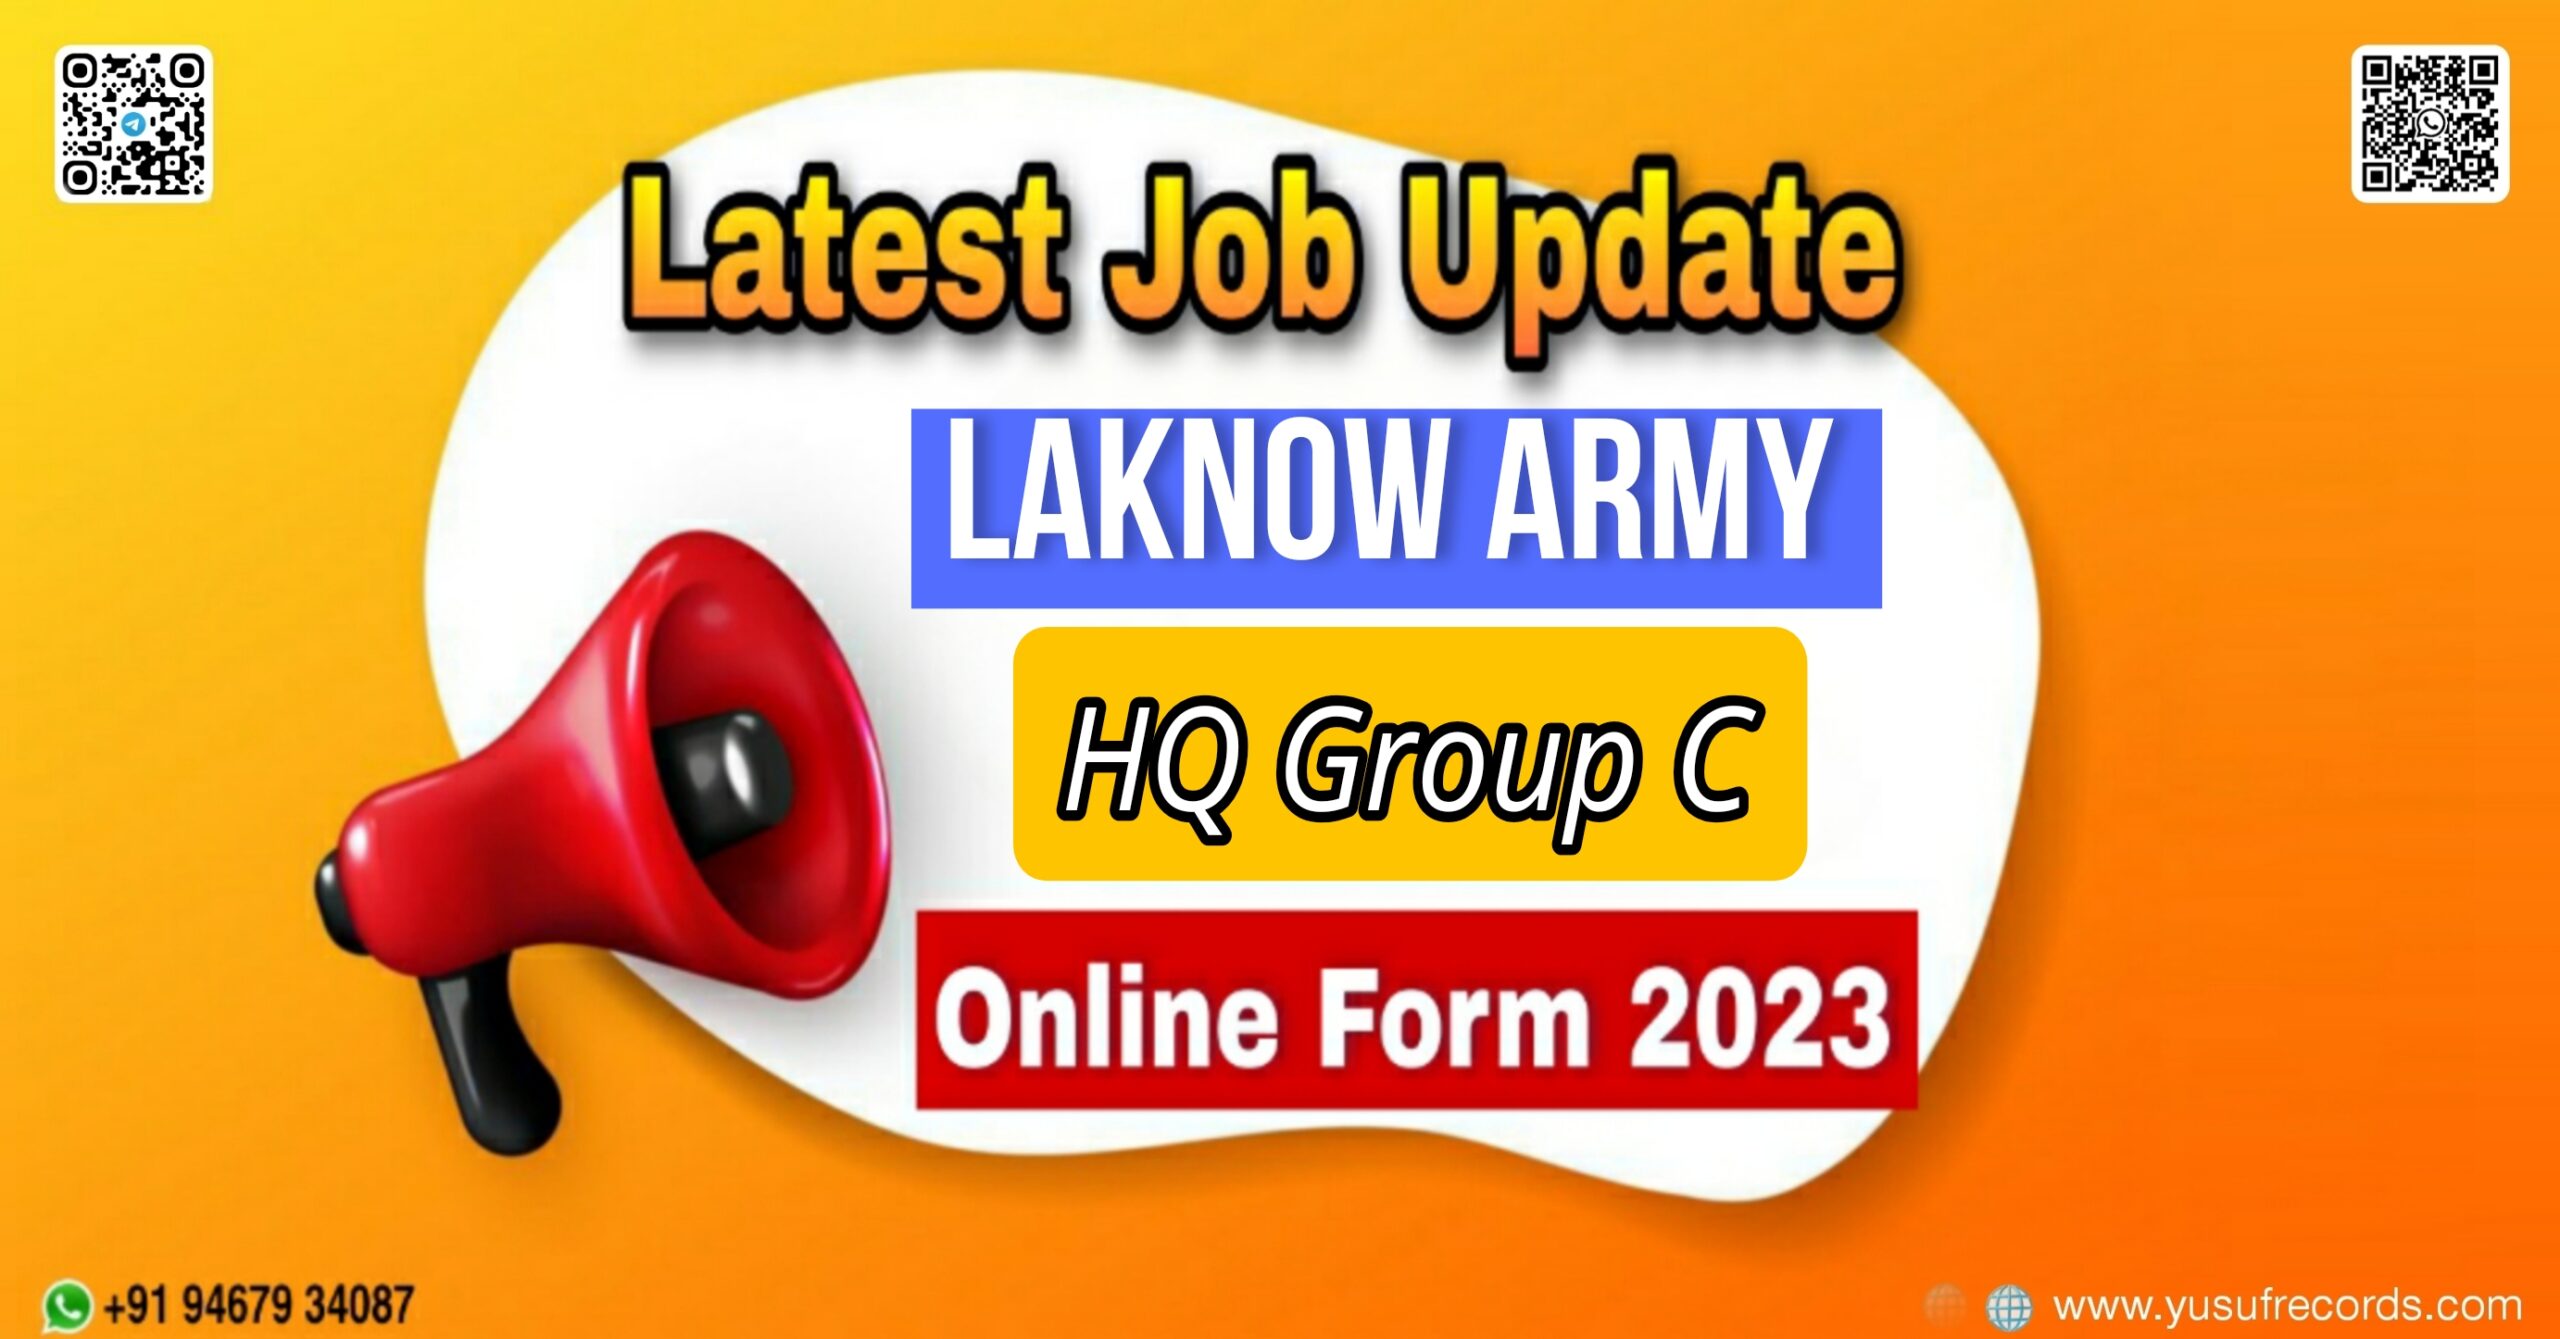 Lucknow Army HQ Group C Offline Form